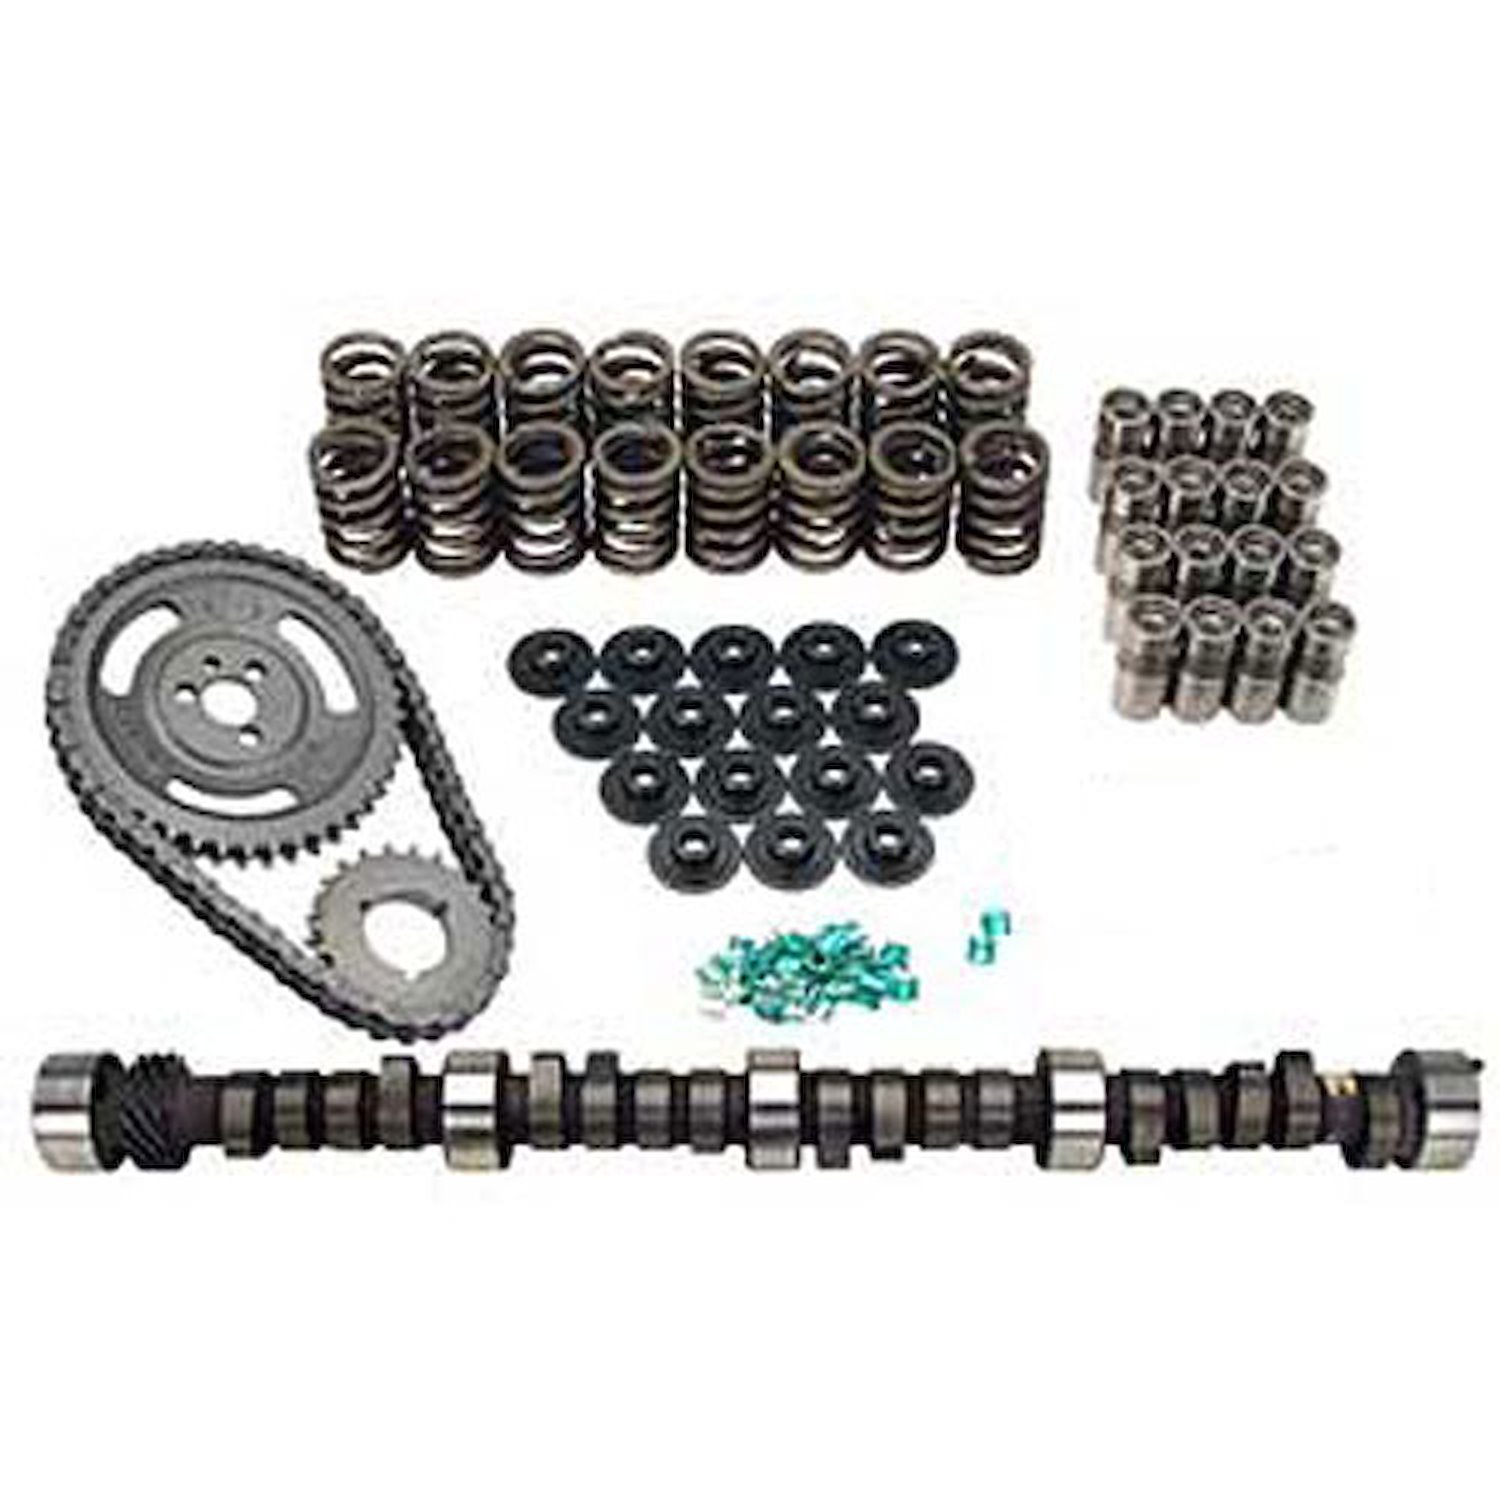 Voodoo Hydraulic Flat Tappet Camshaft Complete Kit Chevy Small Block 262-400 Lift: .489" /.504"